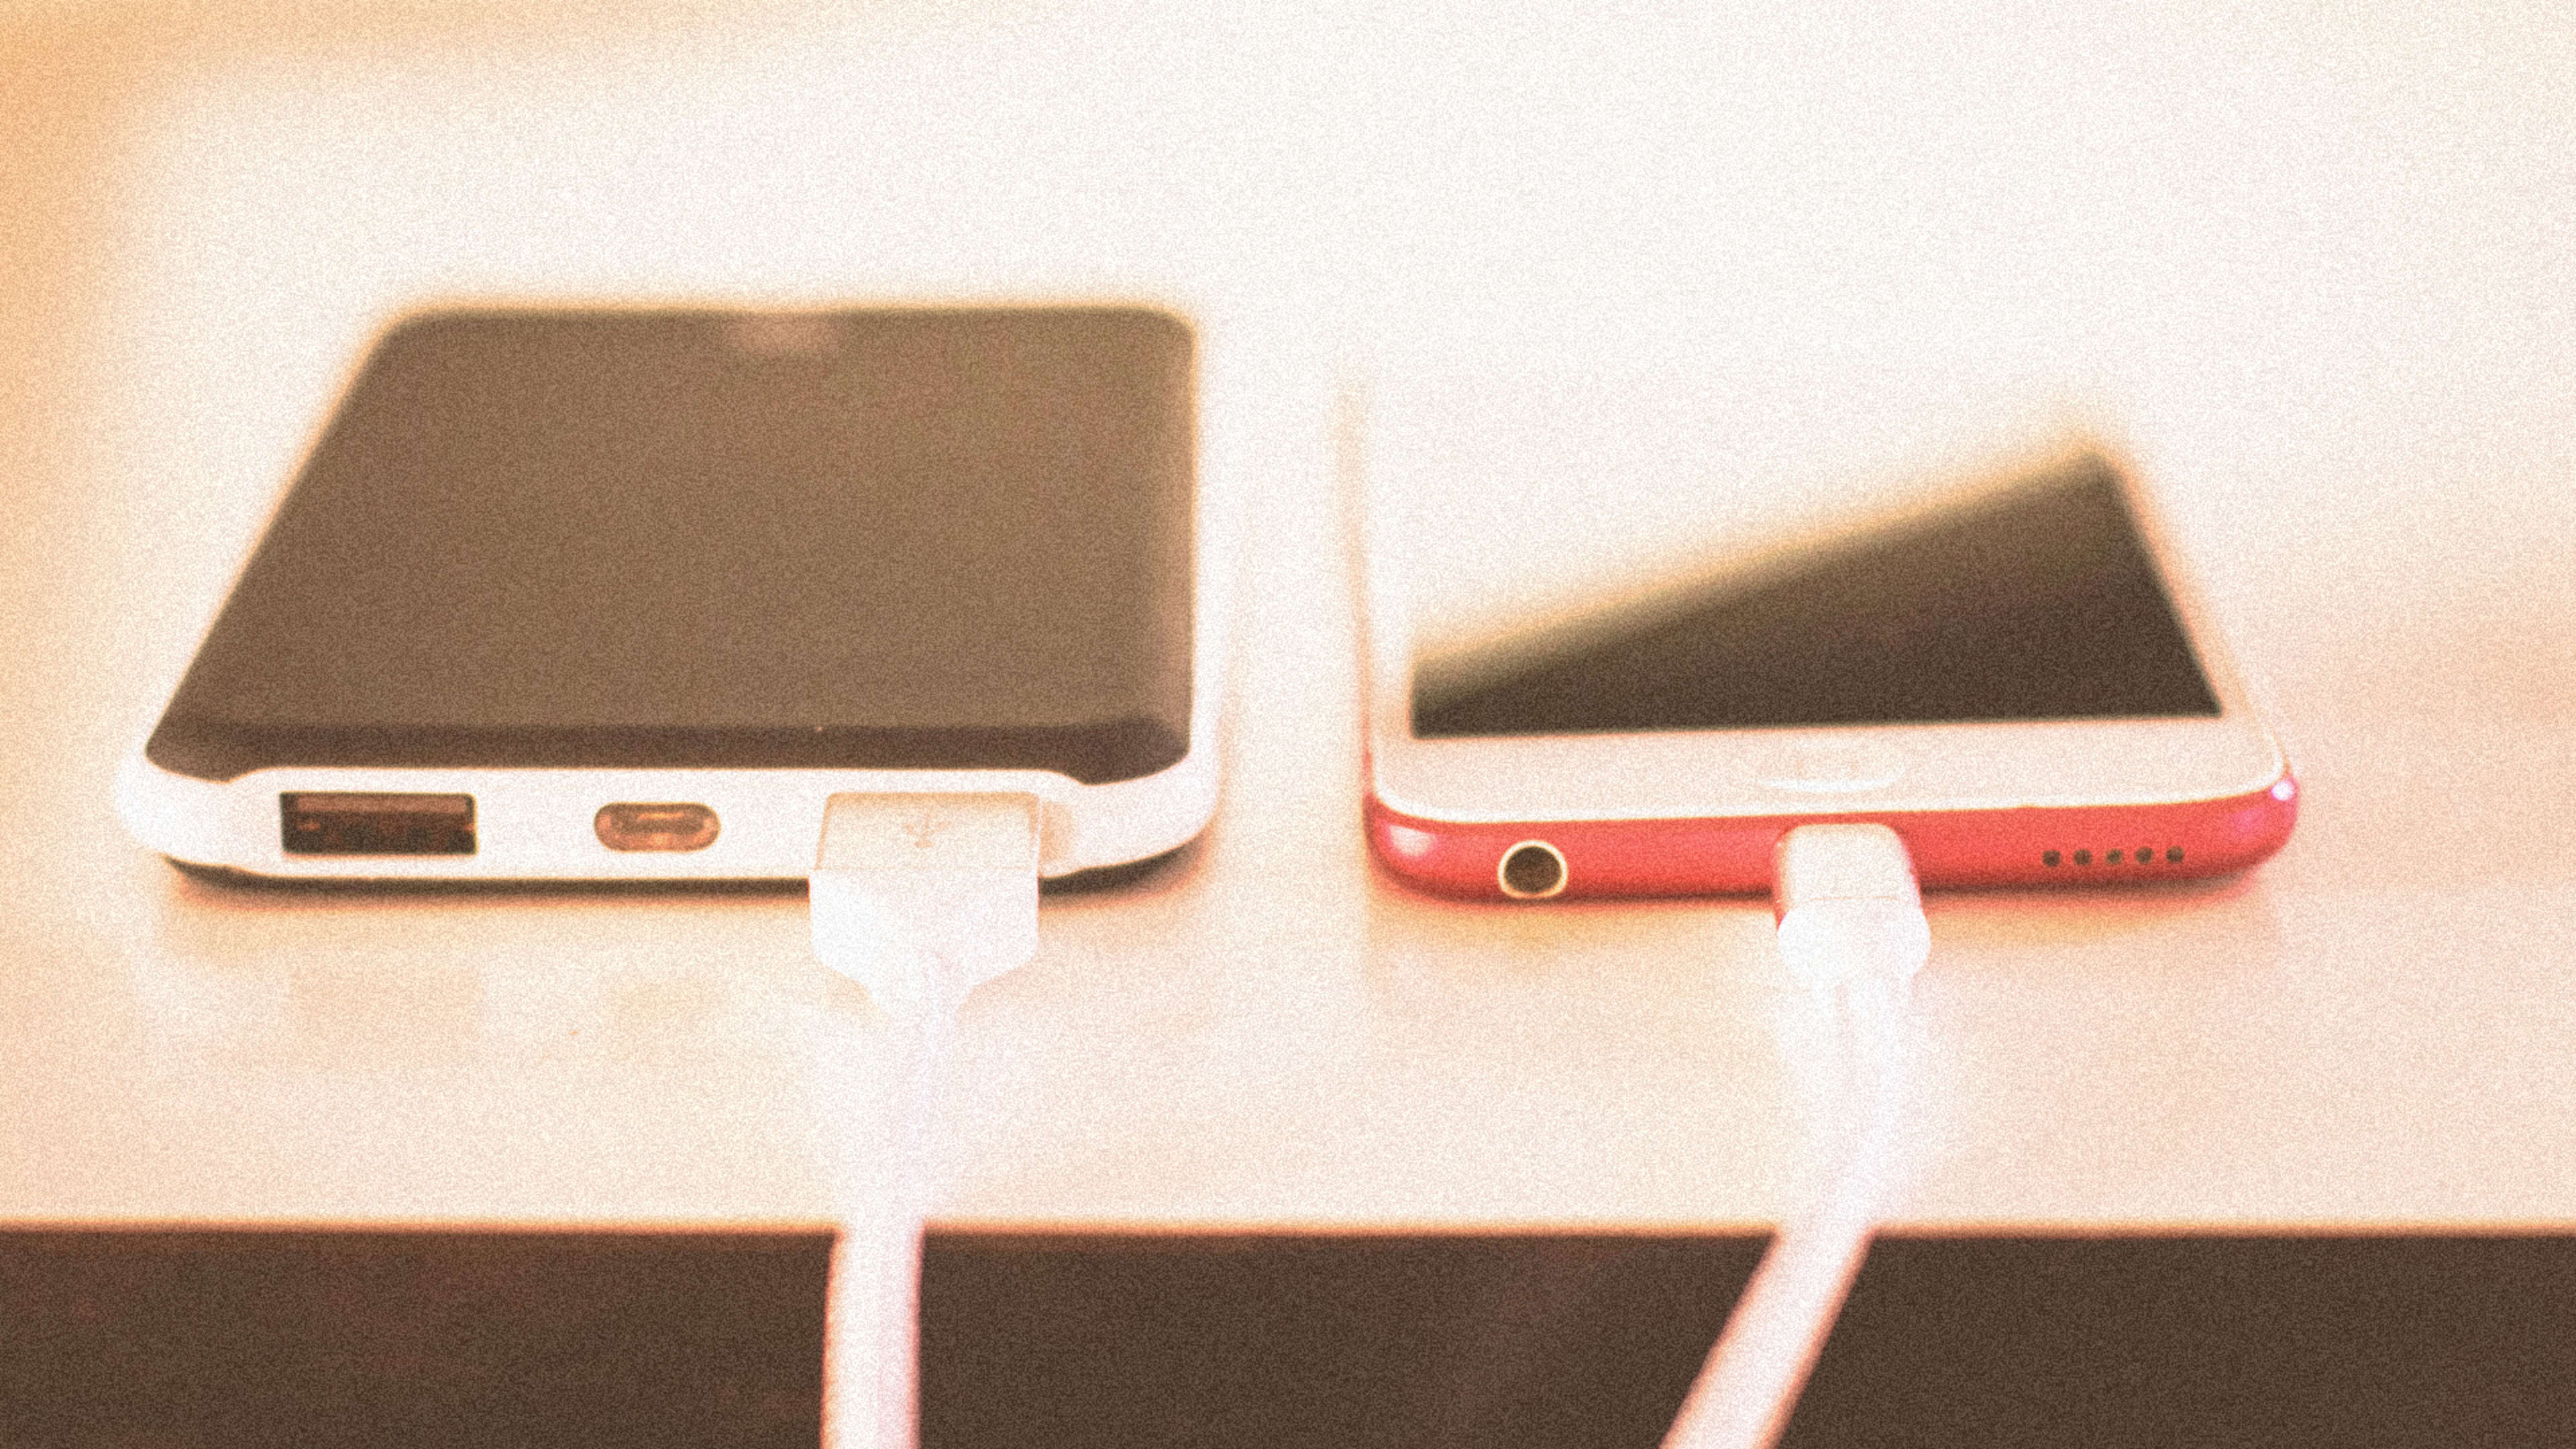 These 3 iPhone features will maximize your battery life